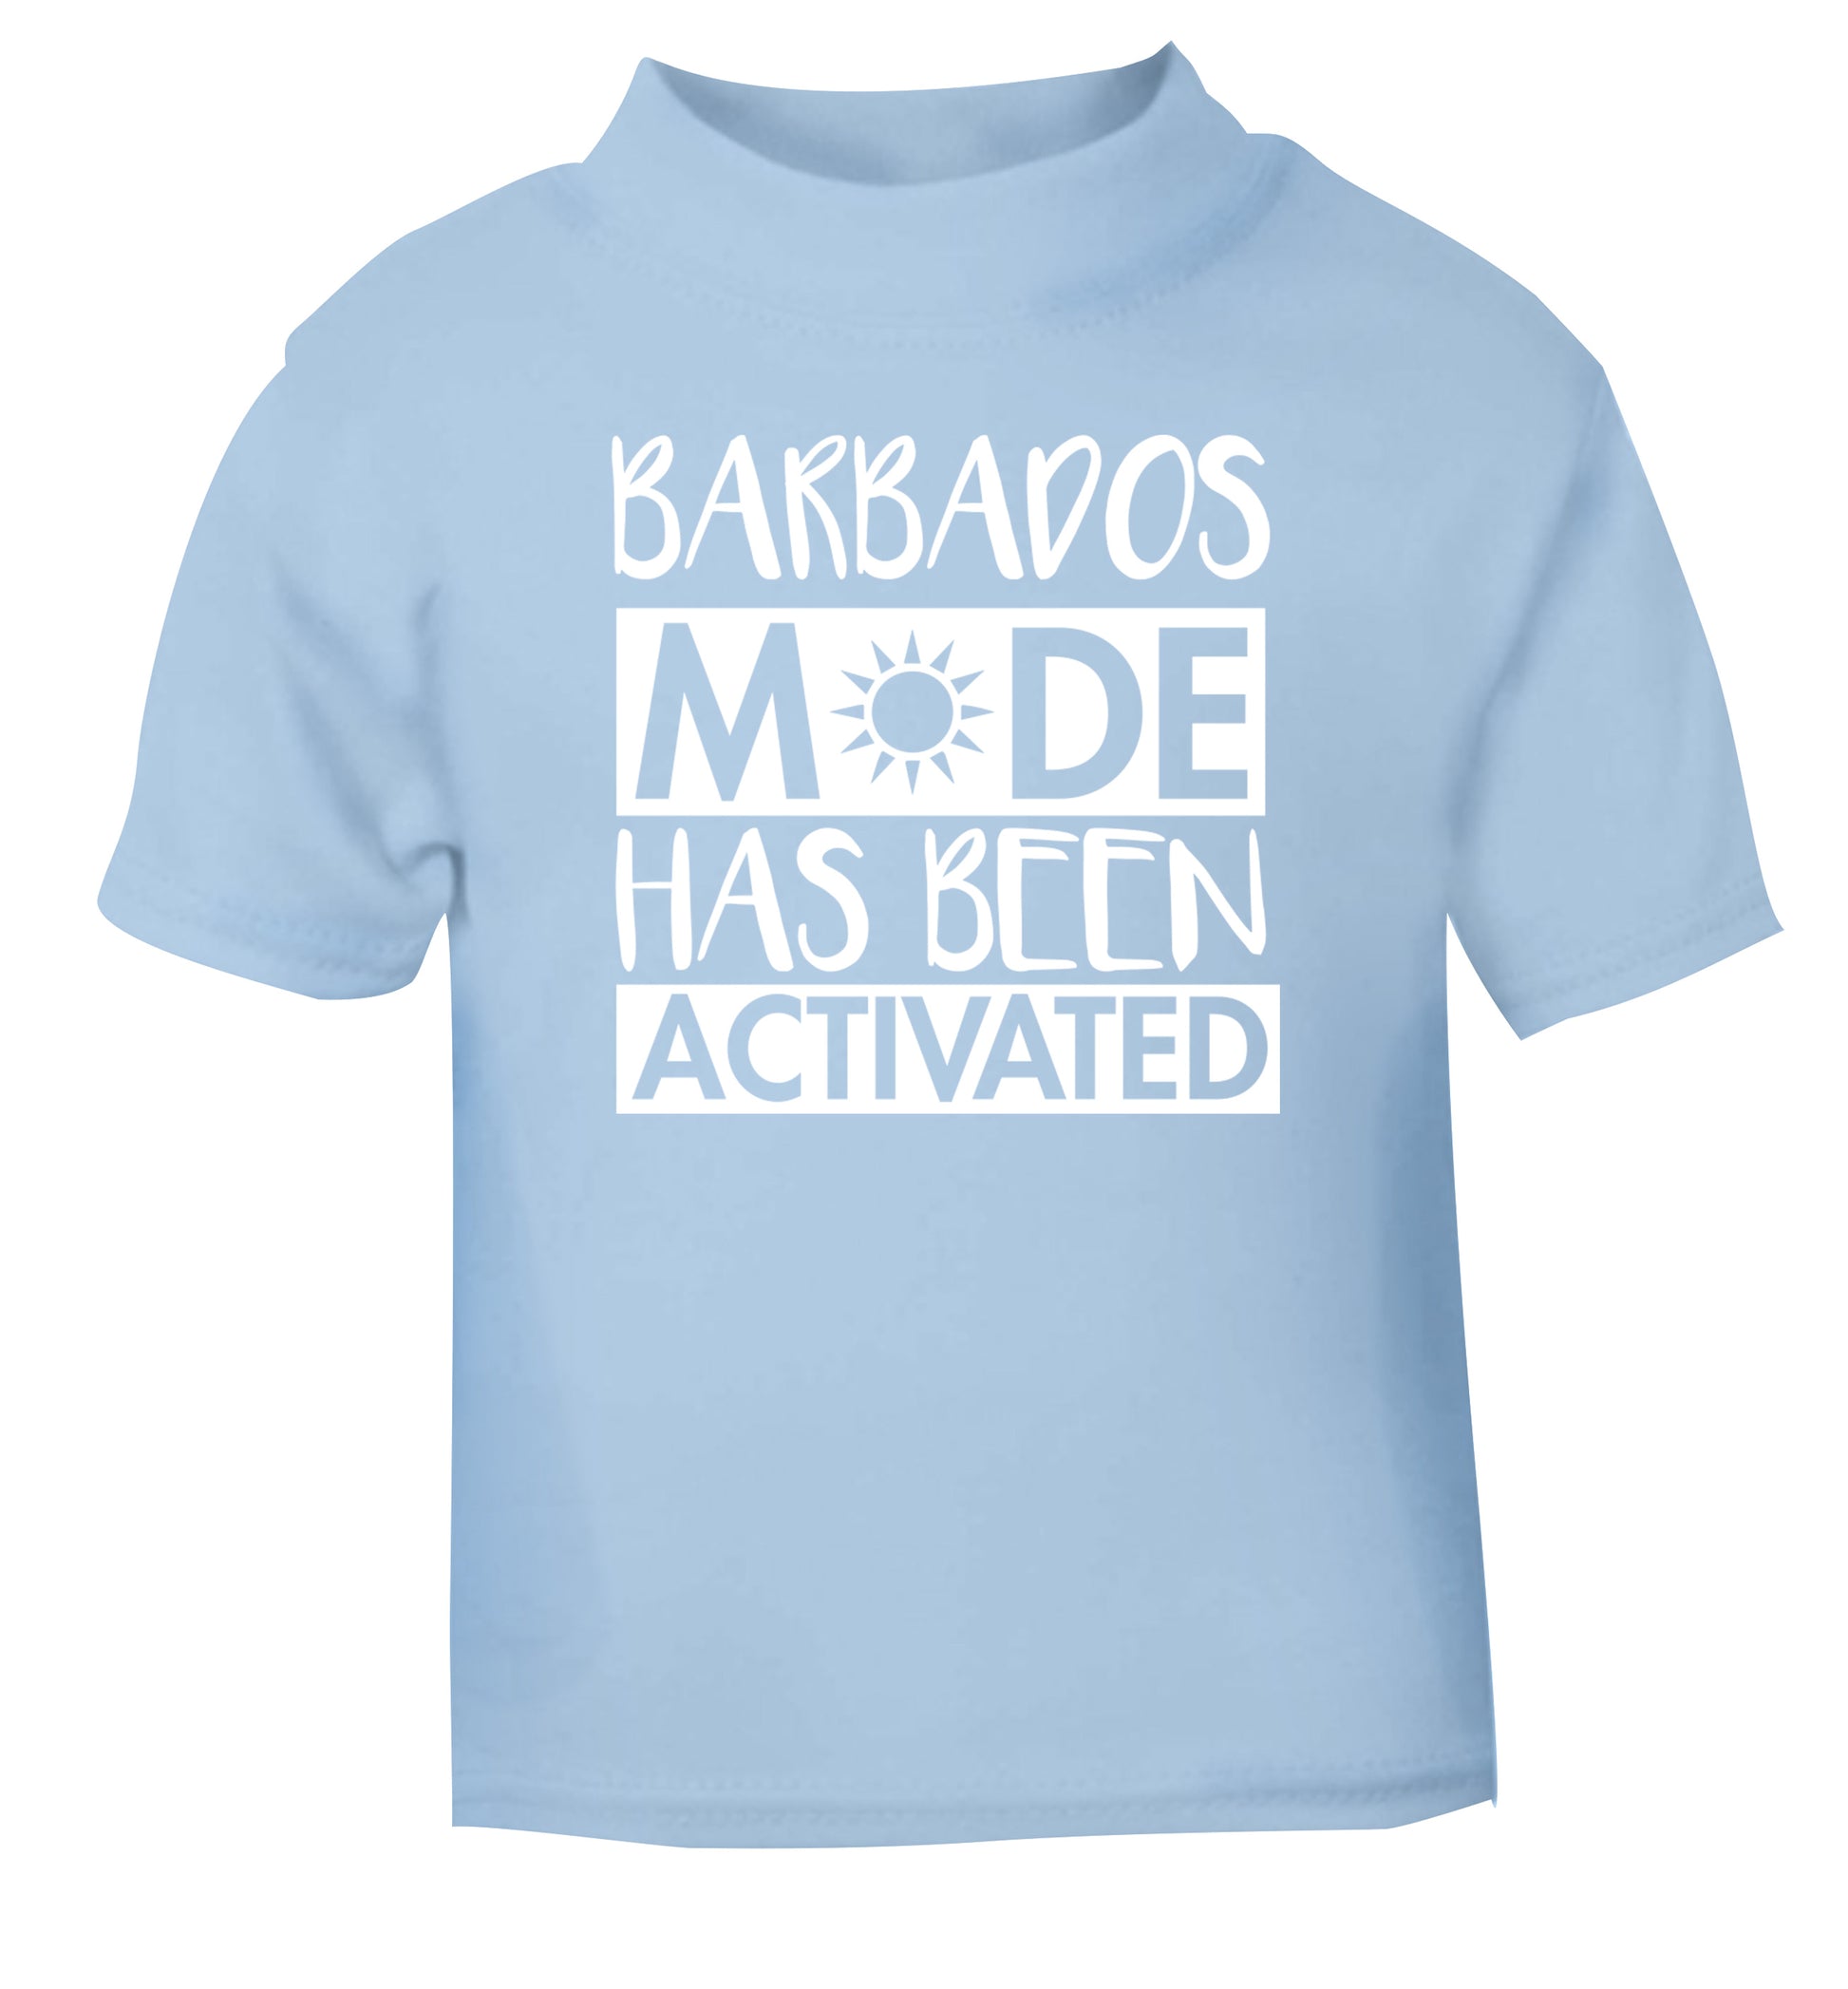 Barbados mode has been activated light blue Baby Toddler Tshirt 2 Years